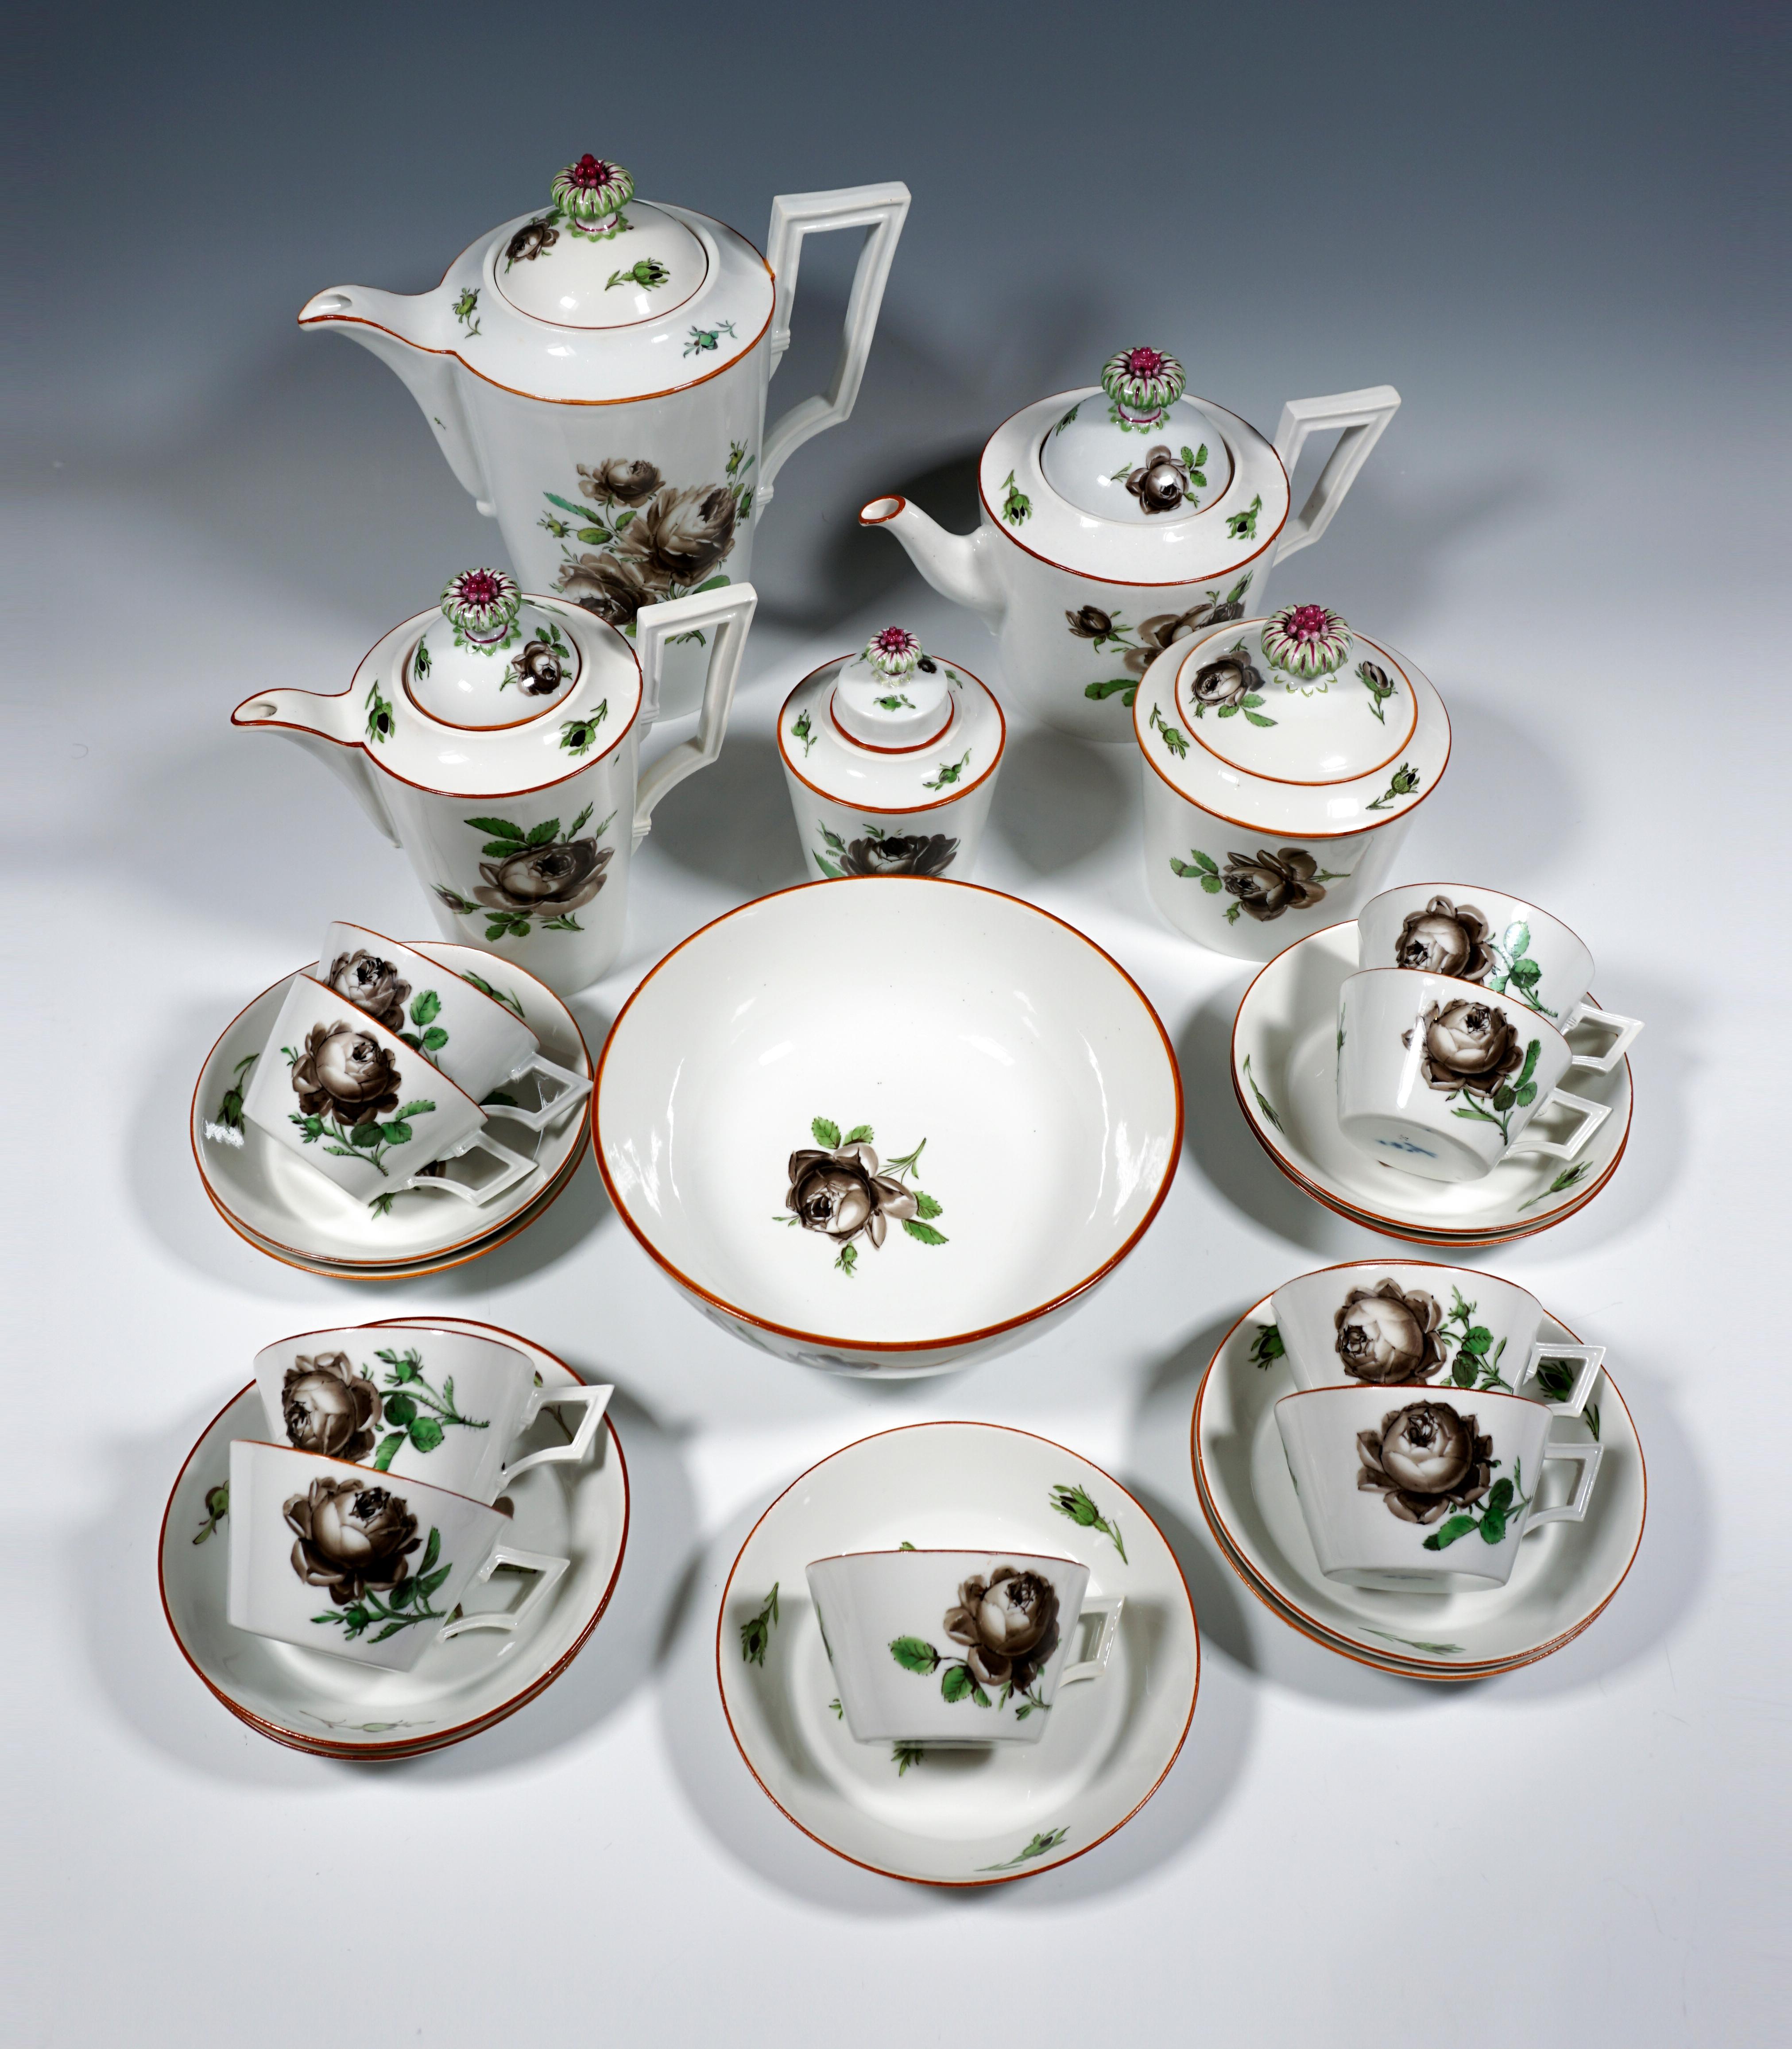 Very early Meissen coffee and tea service, 24 pieces, consisting of a coffee pot with a lid, a teapot with a lid, a milk jug with a lid, a coffee and a tea caddy, as well as a large sugar bowl, nine cups and nine saucers. Smooth conical shape of all